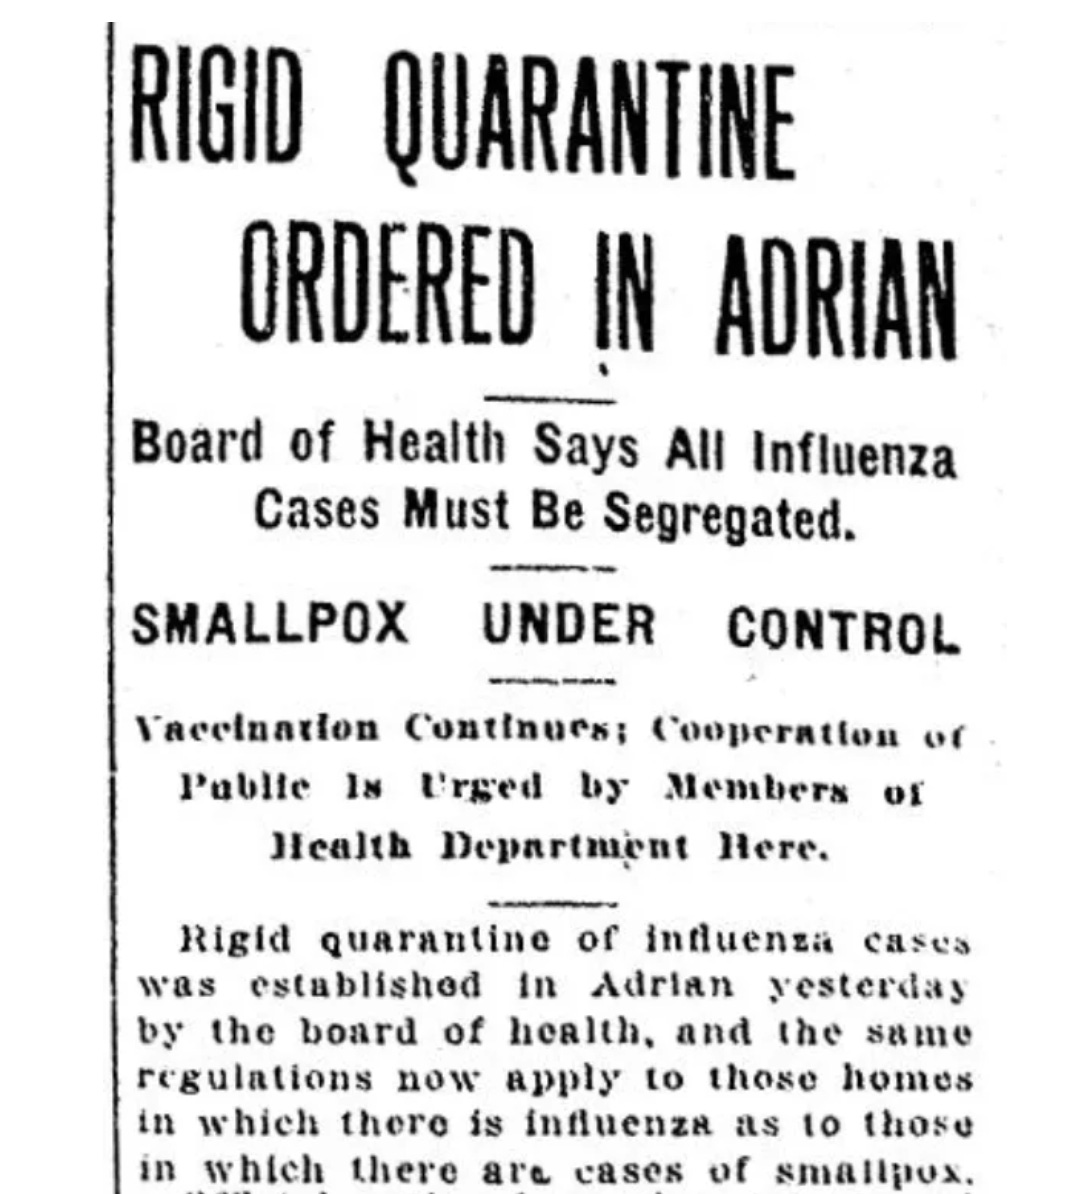 Partial front page story from a December 1918 Daily Telegram: RIGID QUARANTINE ORDERED IN ADRIAN - Board of Health Says All Influenza Cases Must Be Segregated. SMALLPOX UNDER CONTROL Vaccination Continues; Cooperation of Public Is Urged by Members of Health Department Here. Rigid quarantine of influenza cases was established in Adrian yesterday by the board of health, and the same regulations now apply to those homes in which there is influenza as to those in which there are cases of smallpox. 